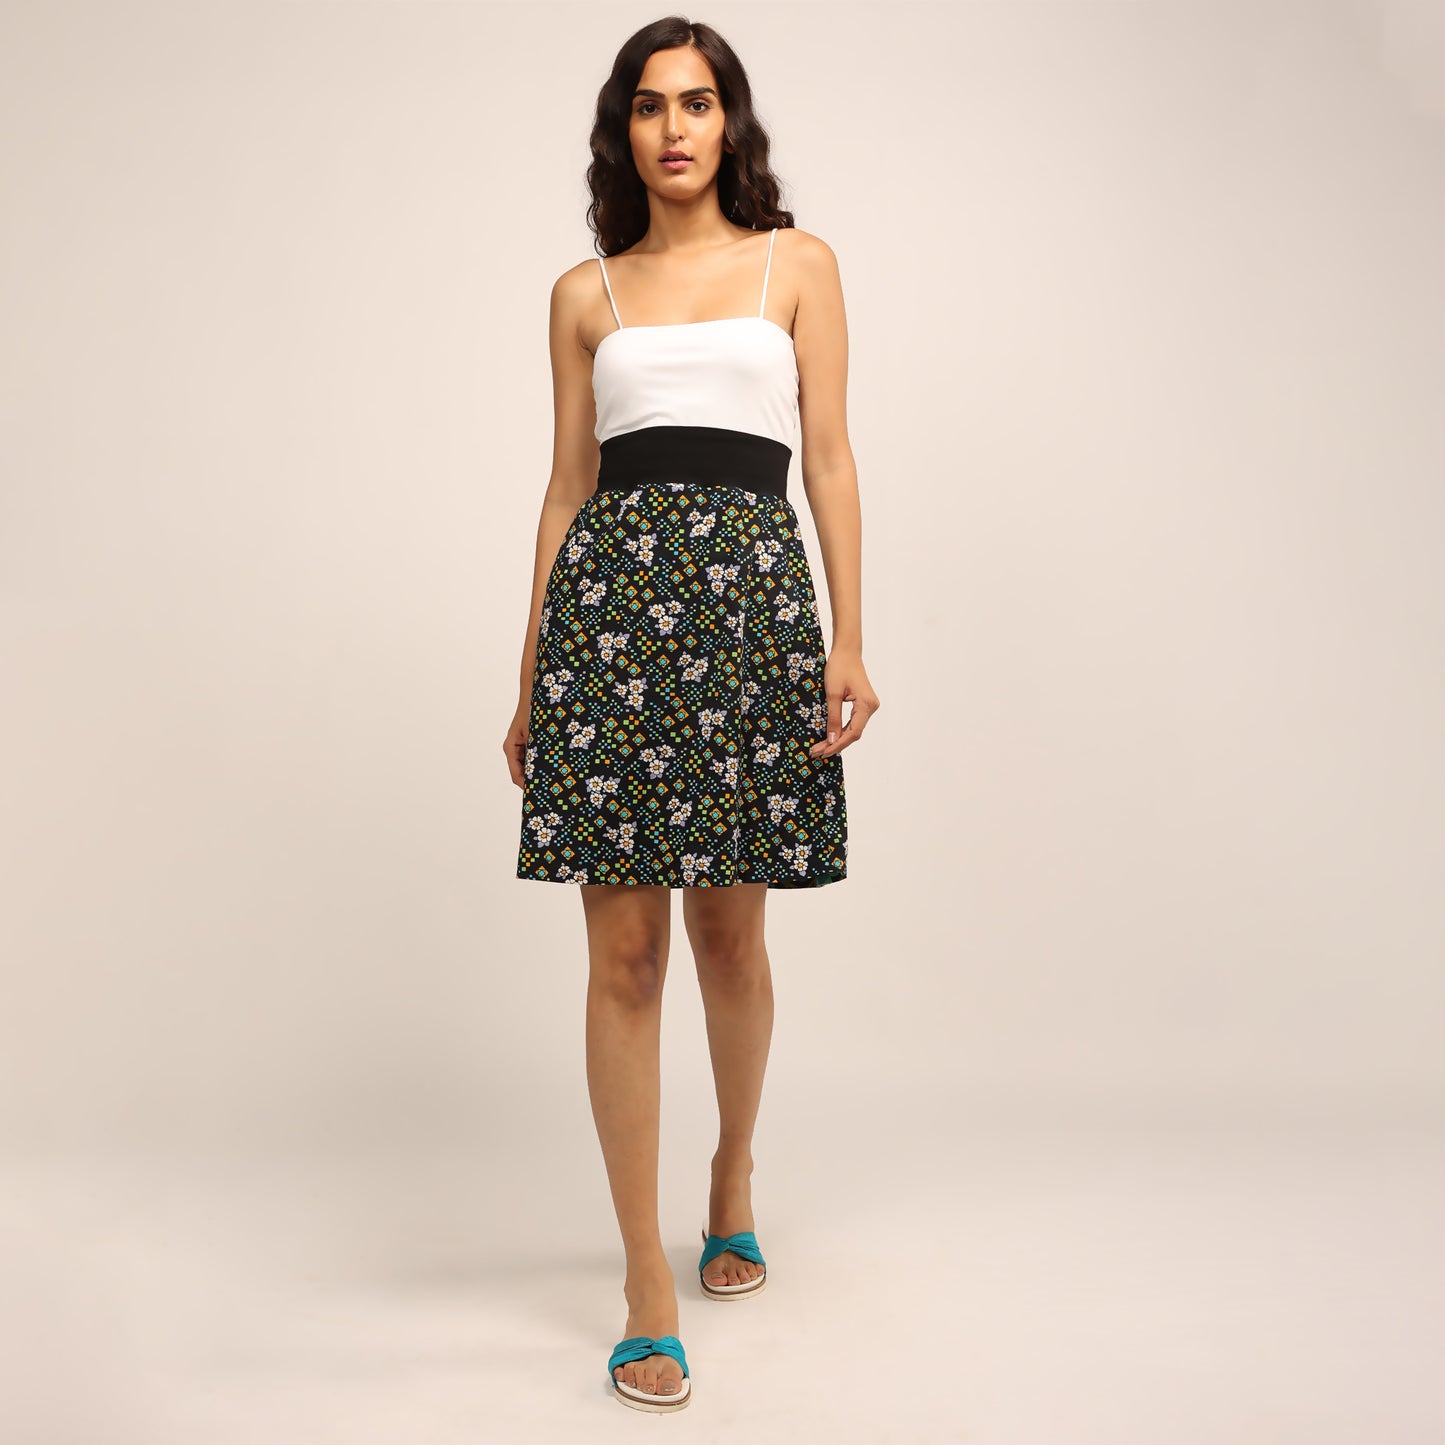 Reversible Skirt - Turquoise Mod & Daisy Lilac